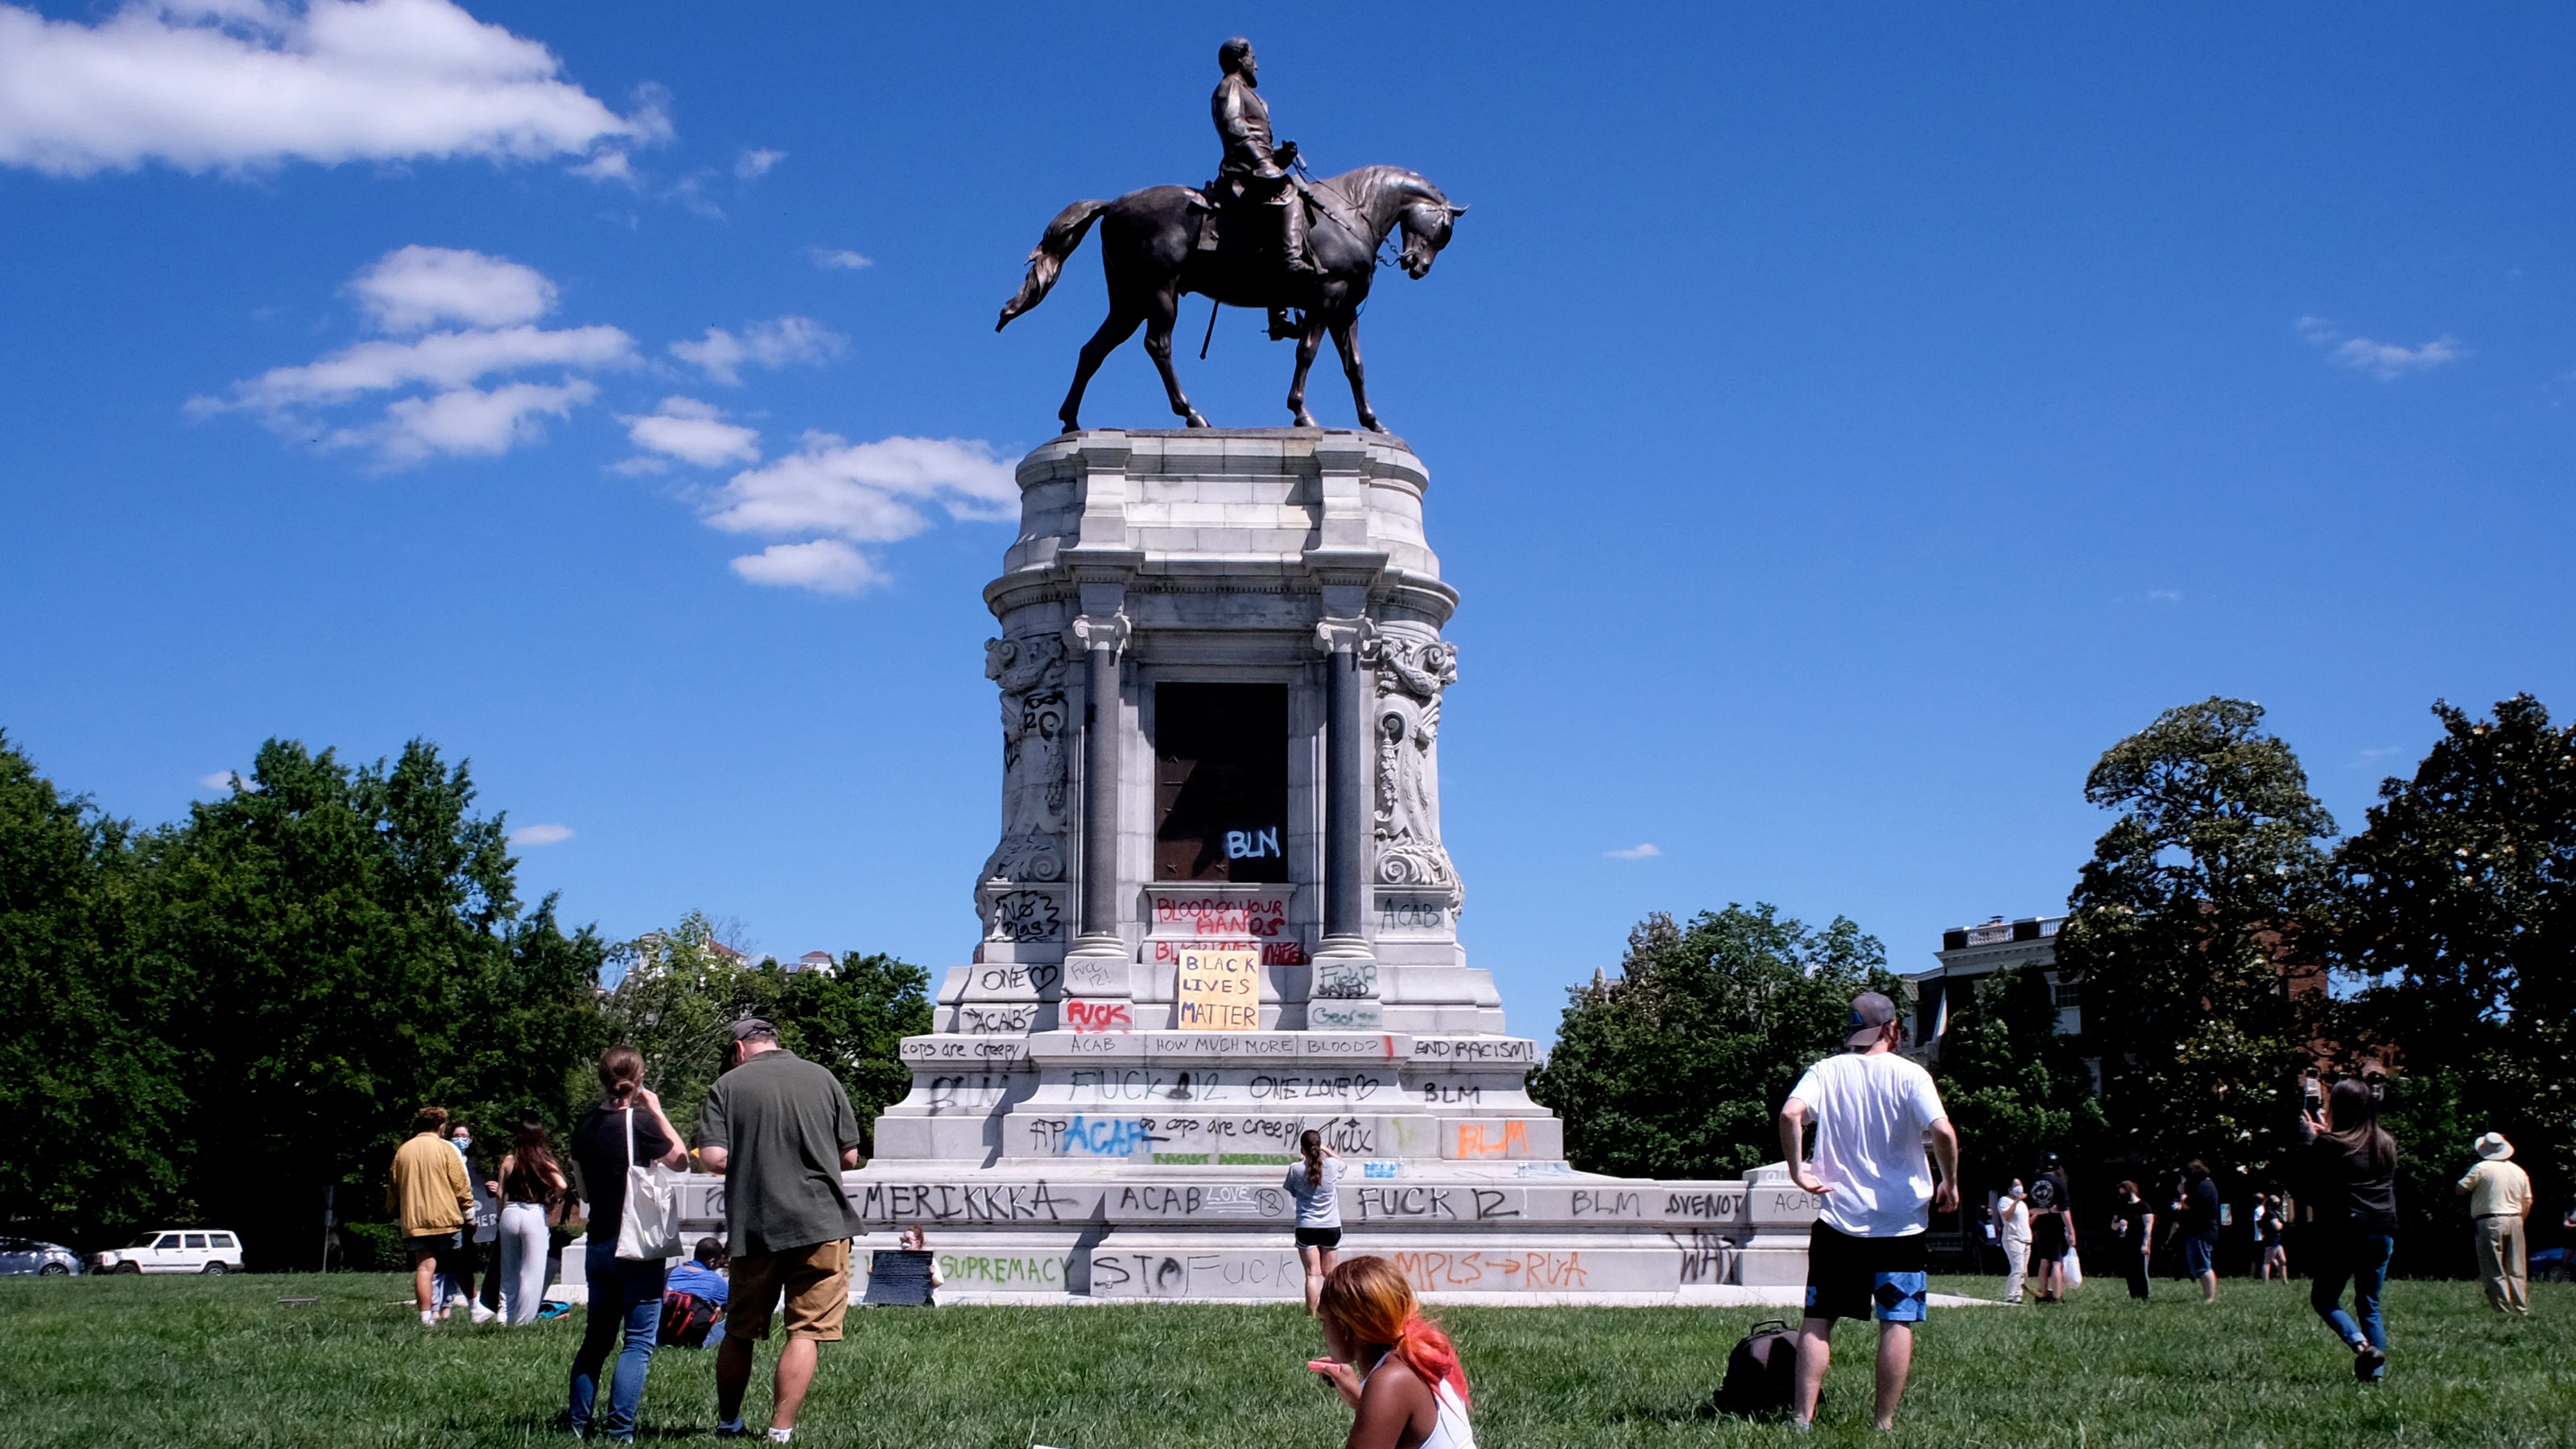 Robert E. Lee statue, Confederate monuments in Richmond to be removed